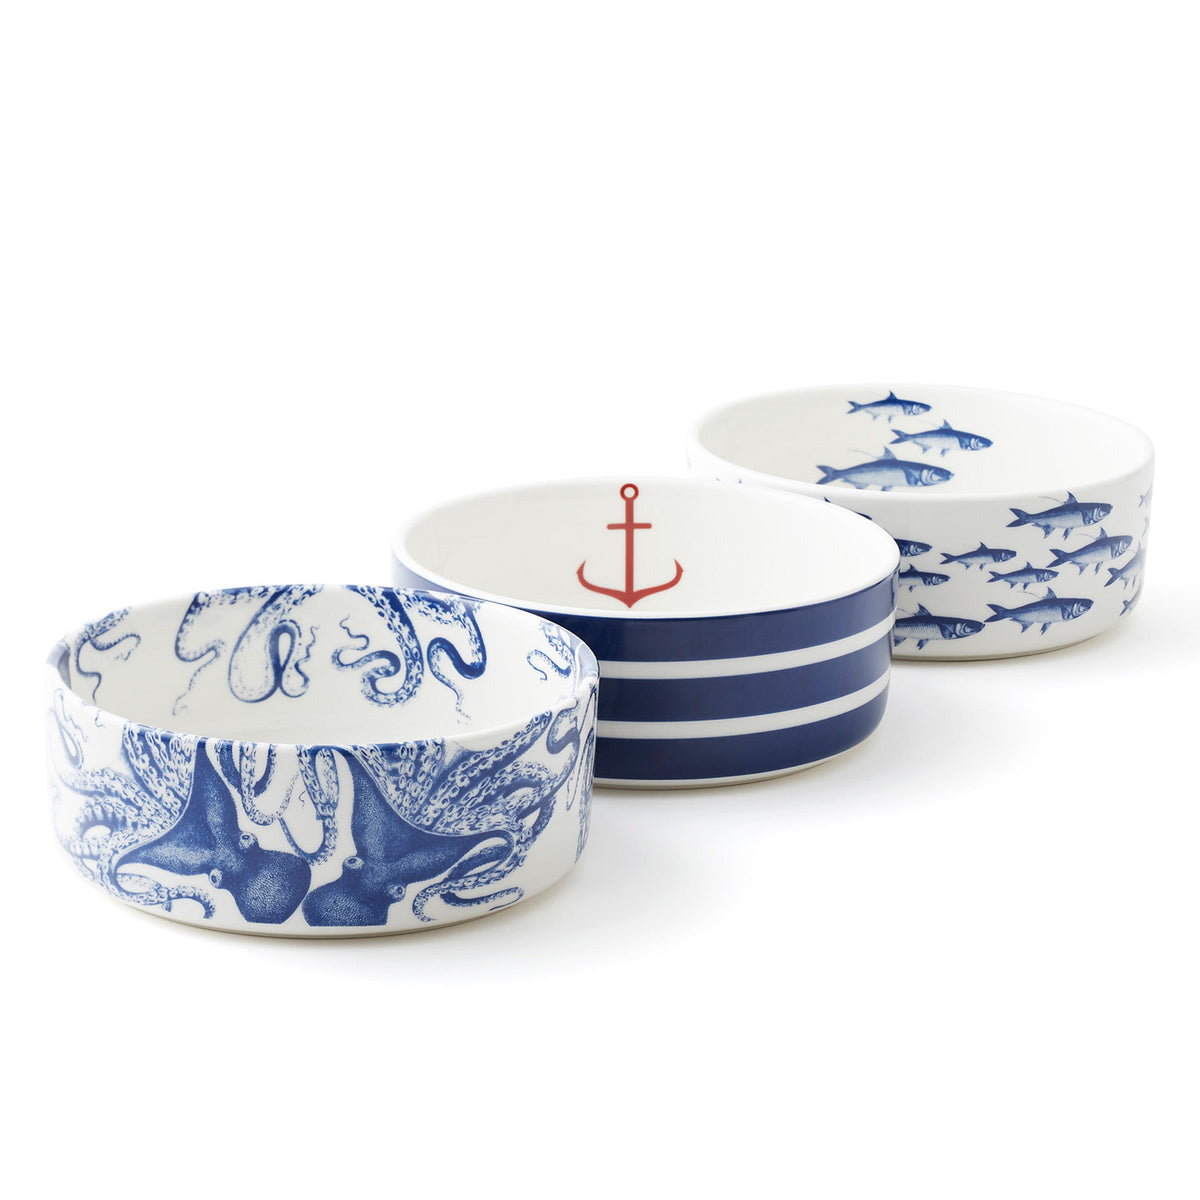 Three Caskata School of Fish Large Pet Bowls with blue and white octopus and anchor designs, perfect as a gift.